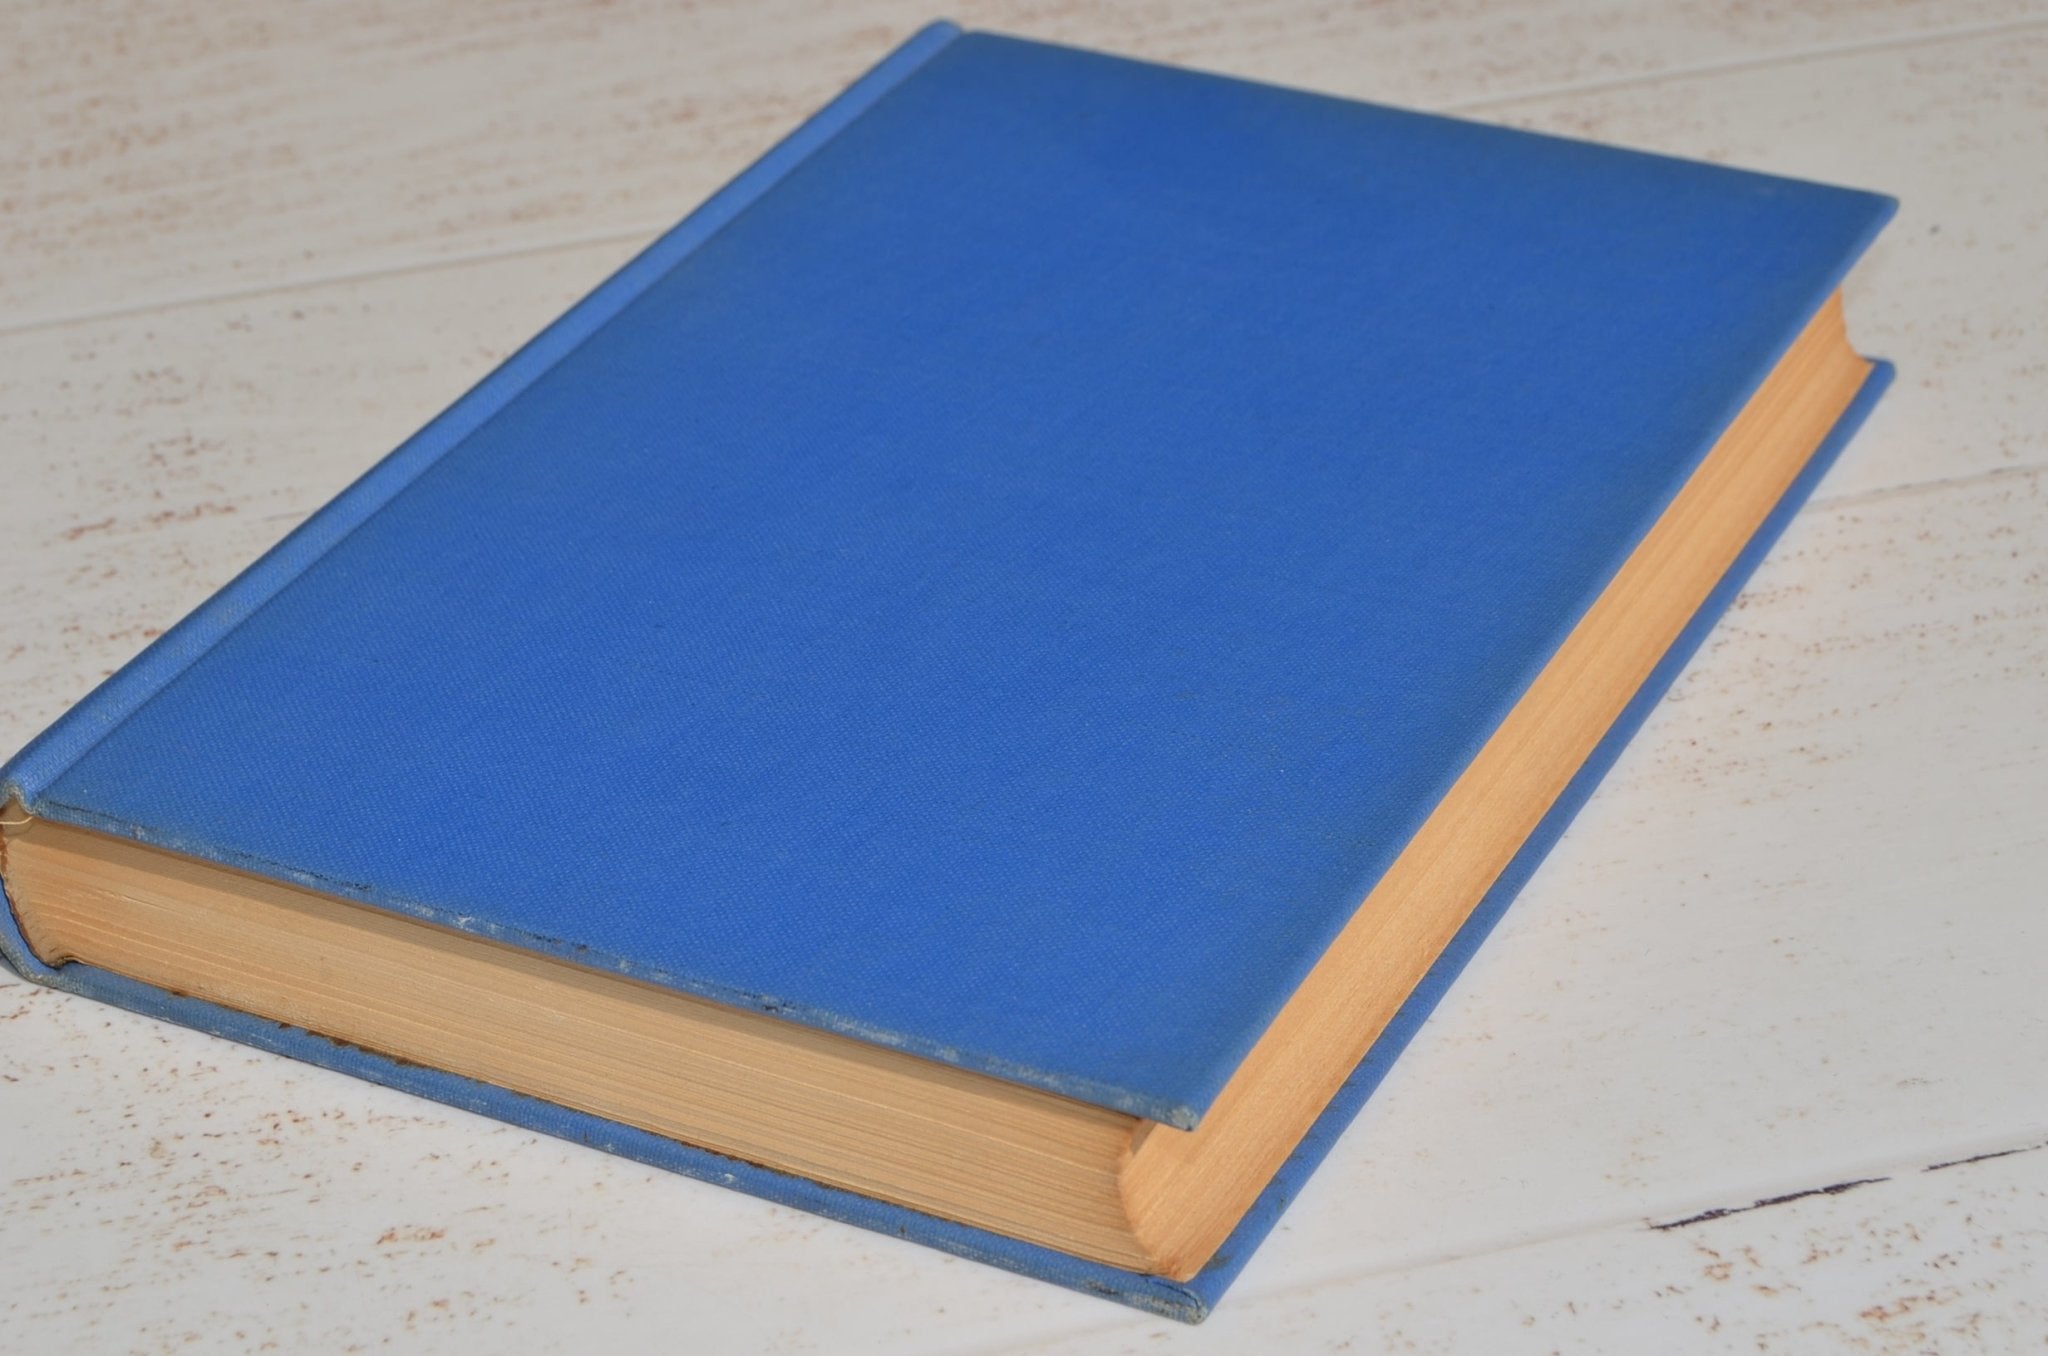 First Edition – Between the Acts by Virginia Woolf 1941 - Brookfield Books